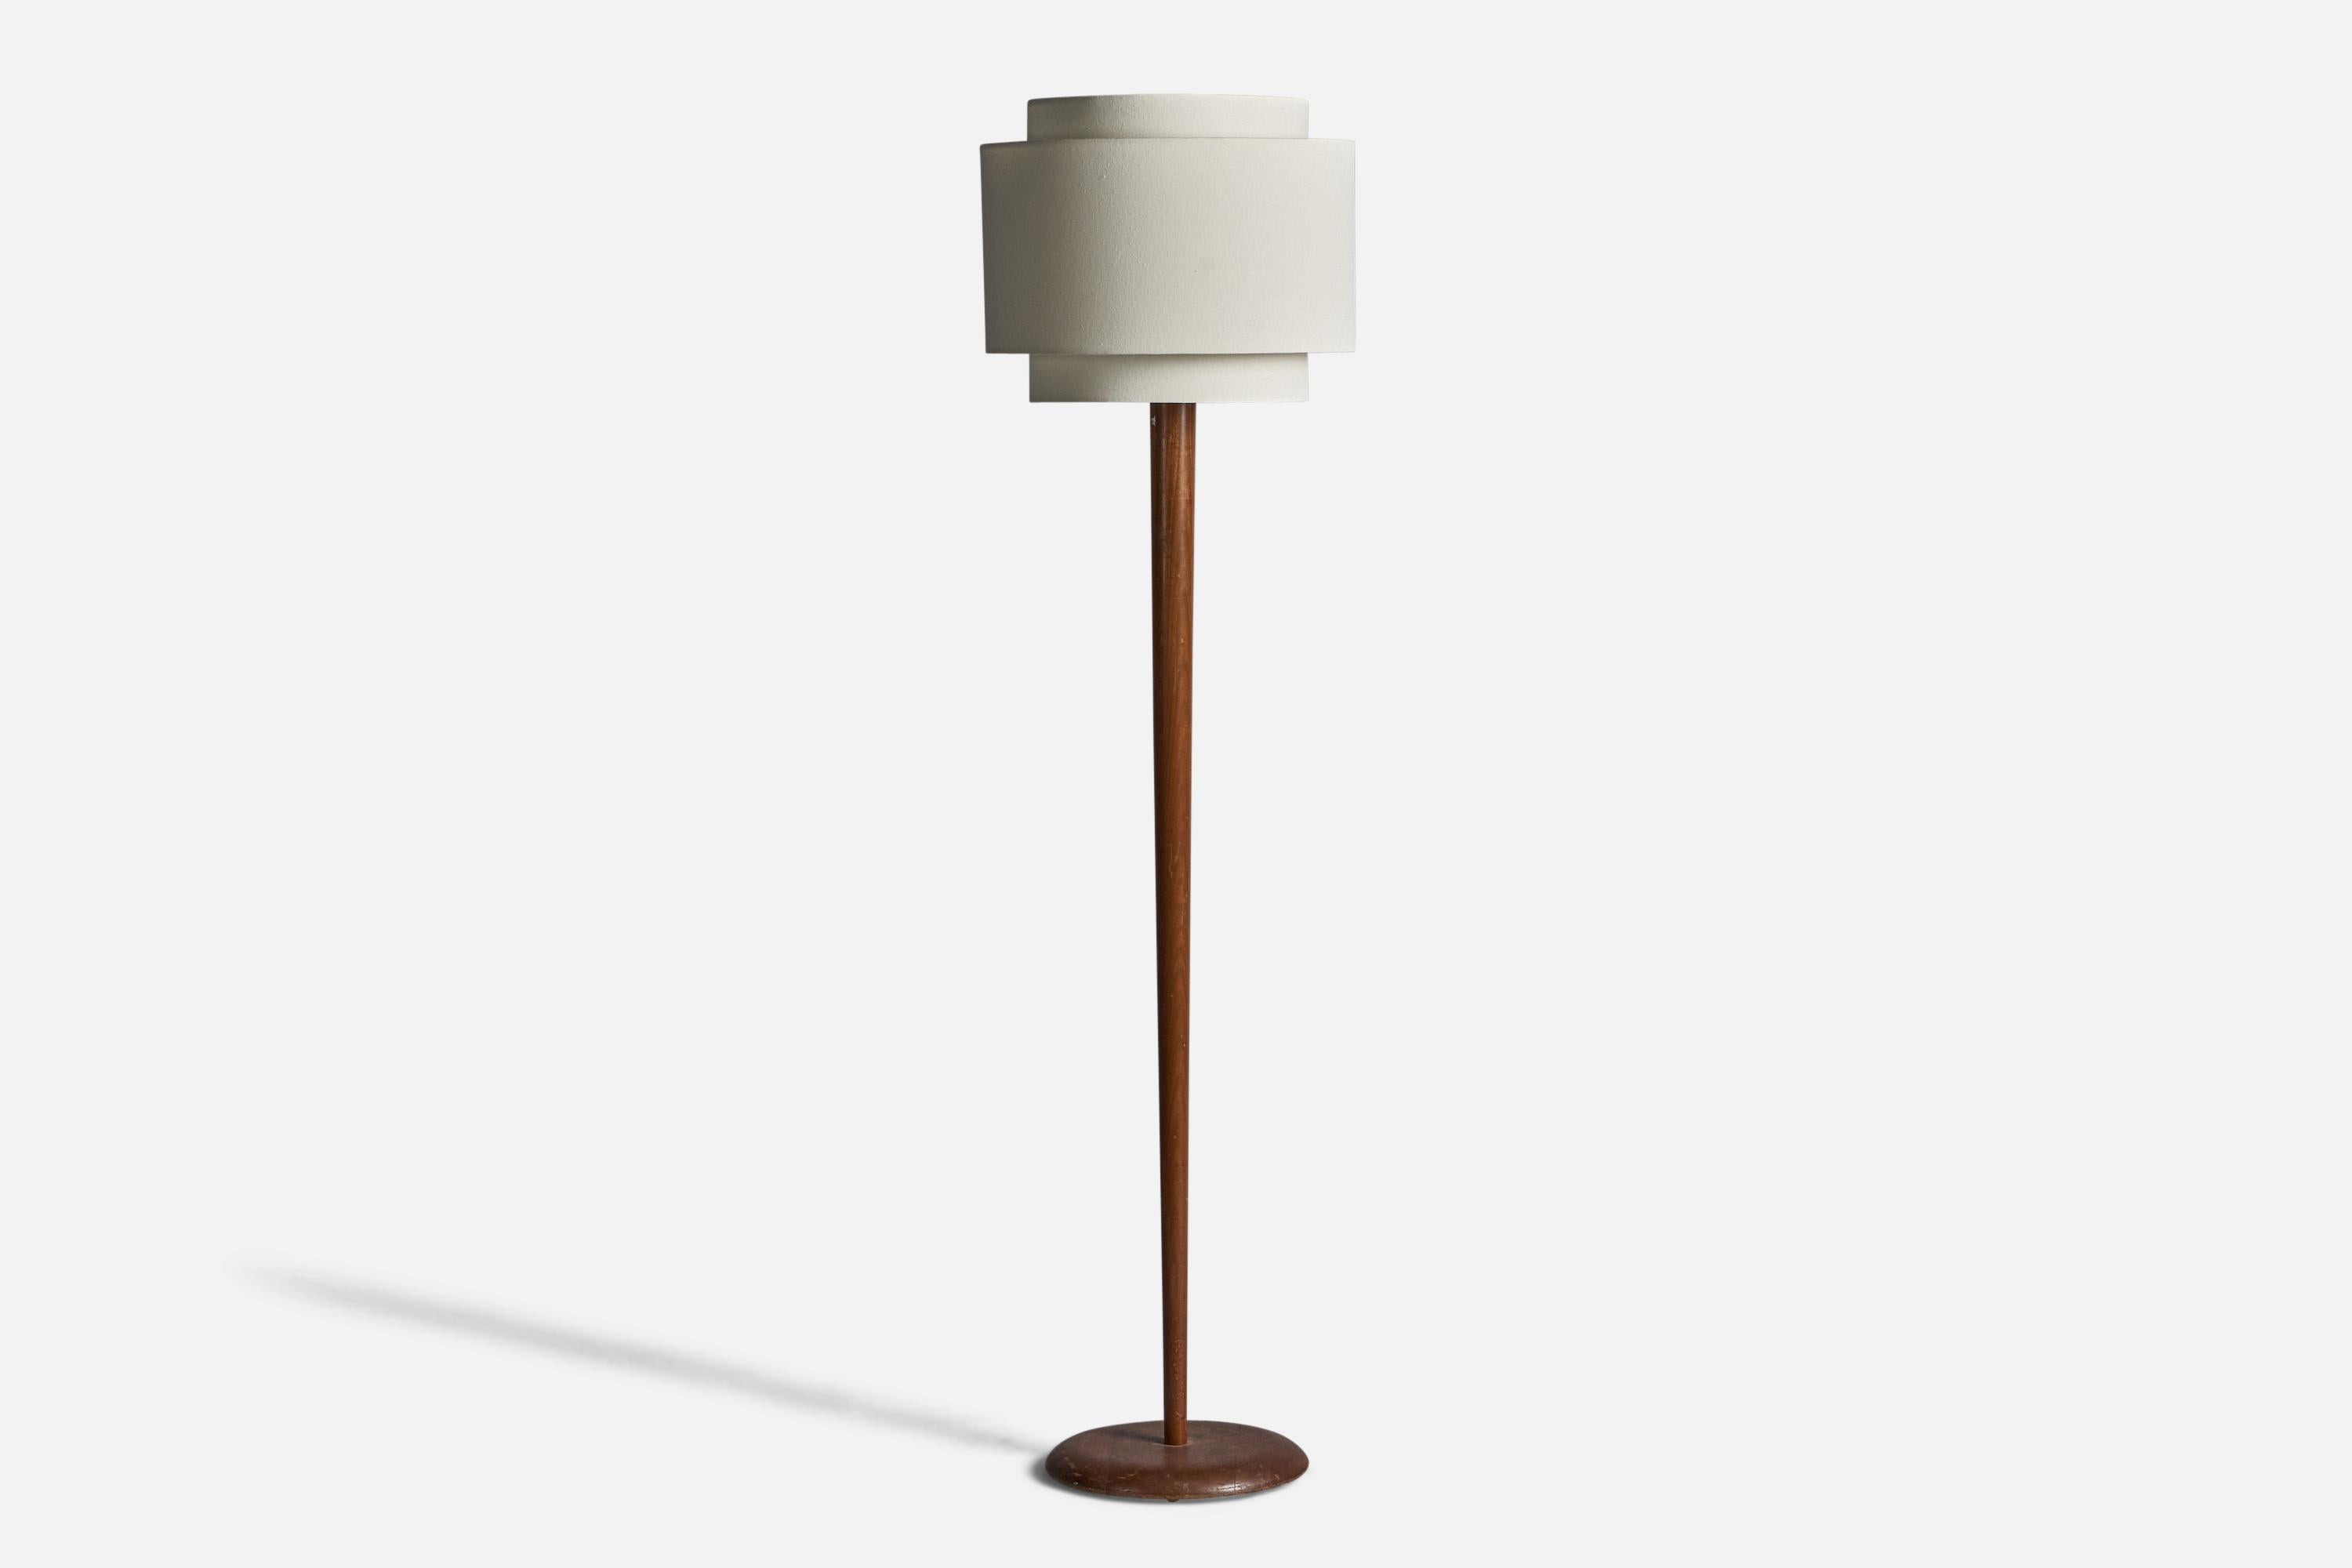 A walnut and white fabric floor lamp, design and production attributed to Vladimir Kagan, USA, 1950s.

Overall Dimensions (inches): 60.5